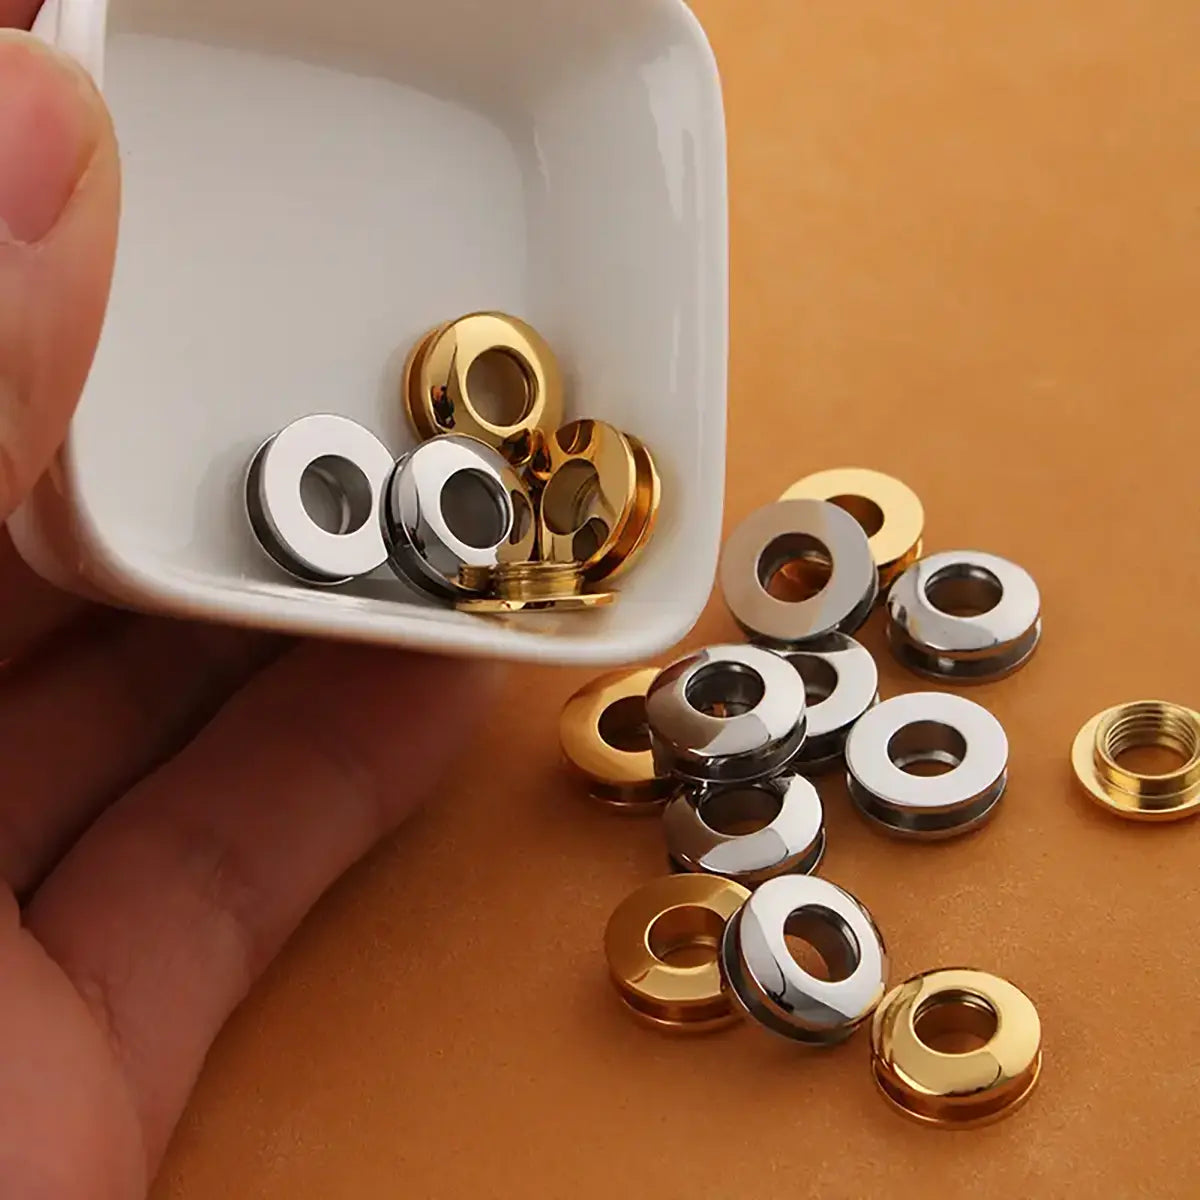 Screw Eyelets 6.5mm Stainless Steel